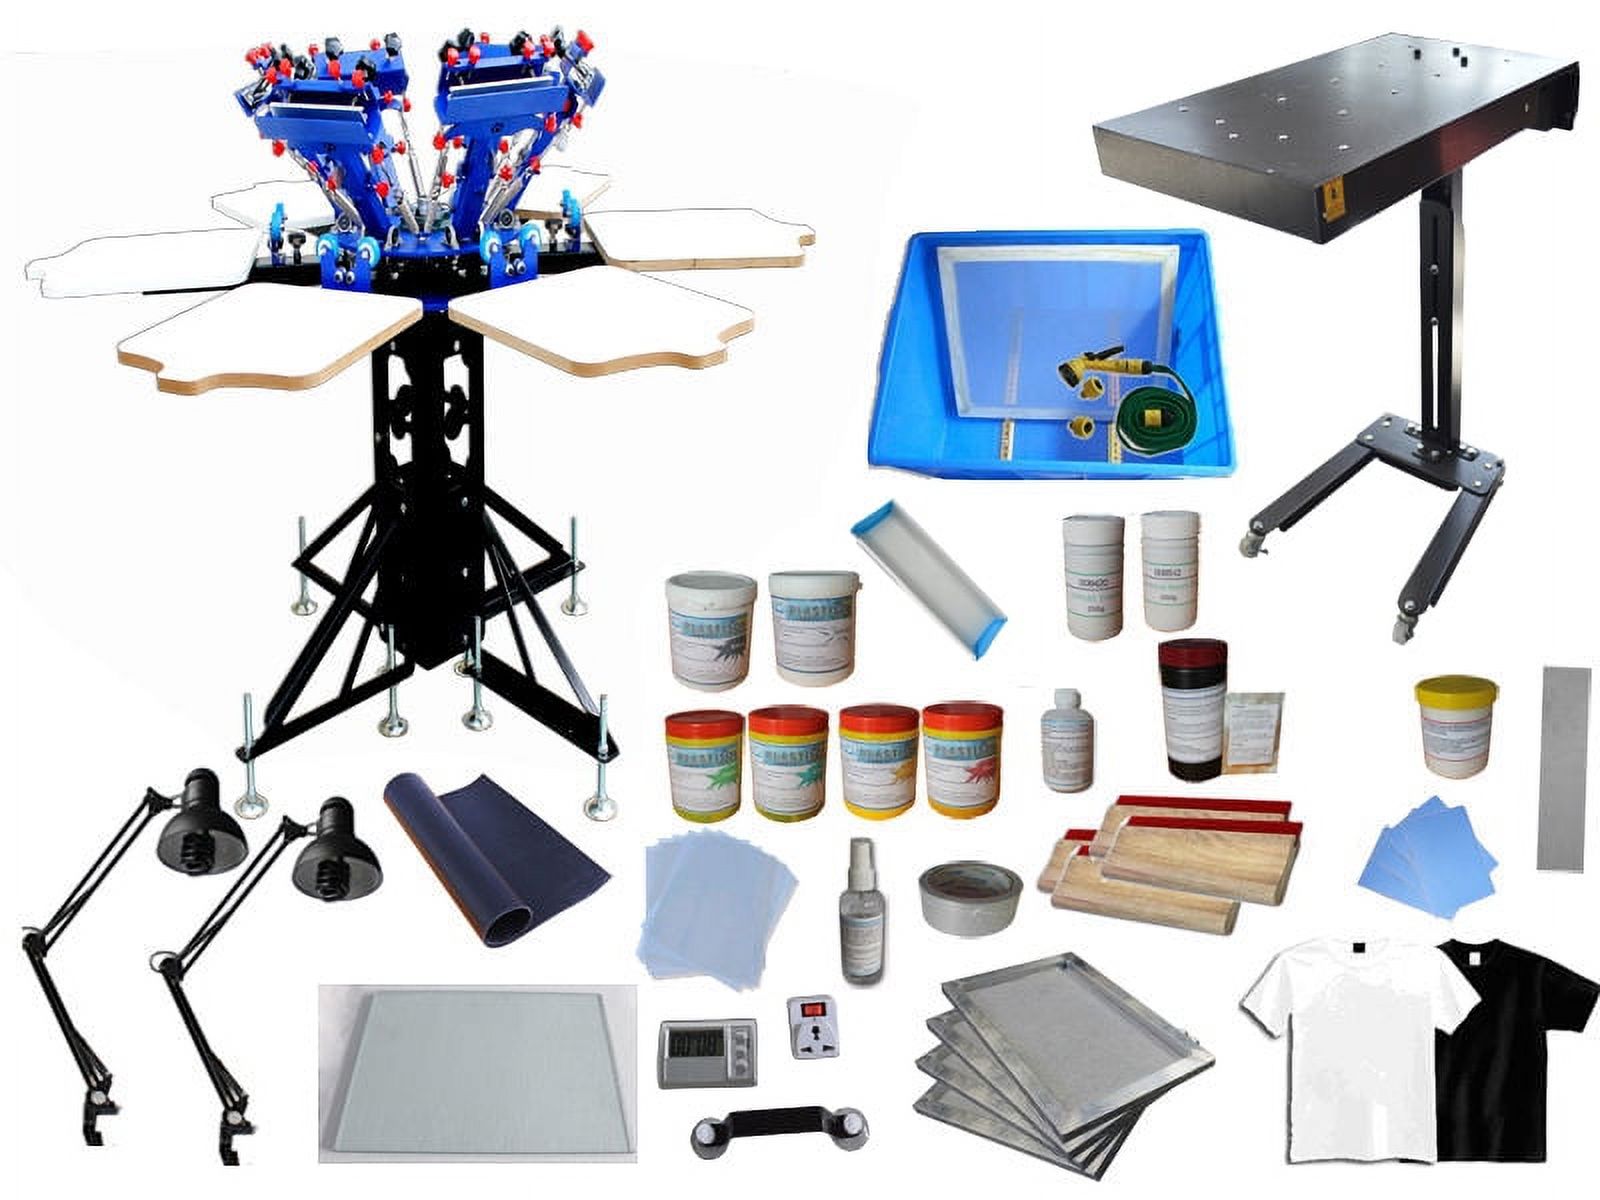 Techtongda 6 Color Silk Screen Printing Press Equipment Kit with Complete Supply Materials #006962 - image 1 of 11